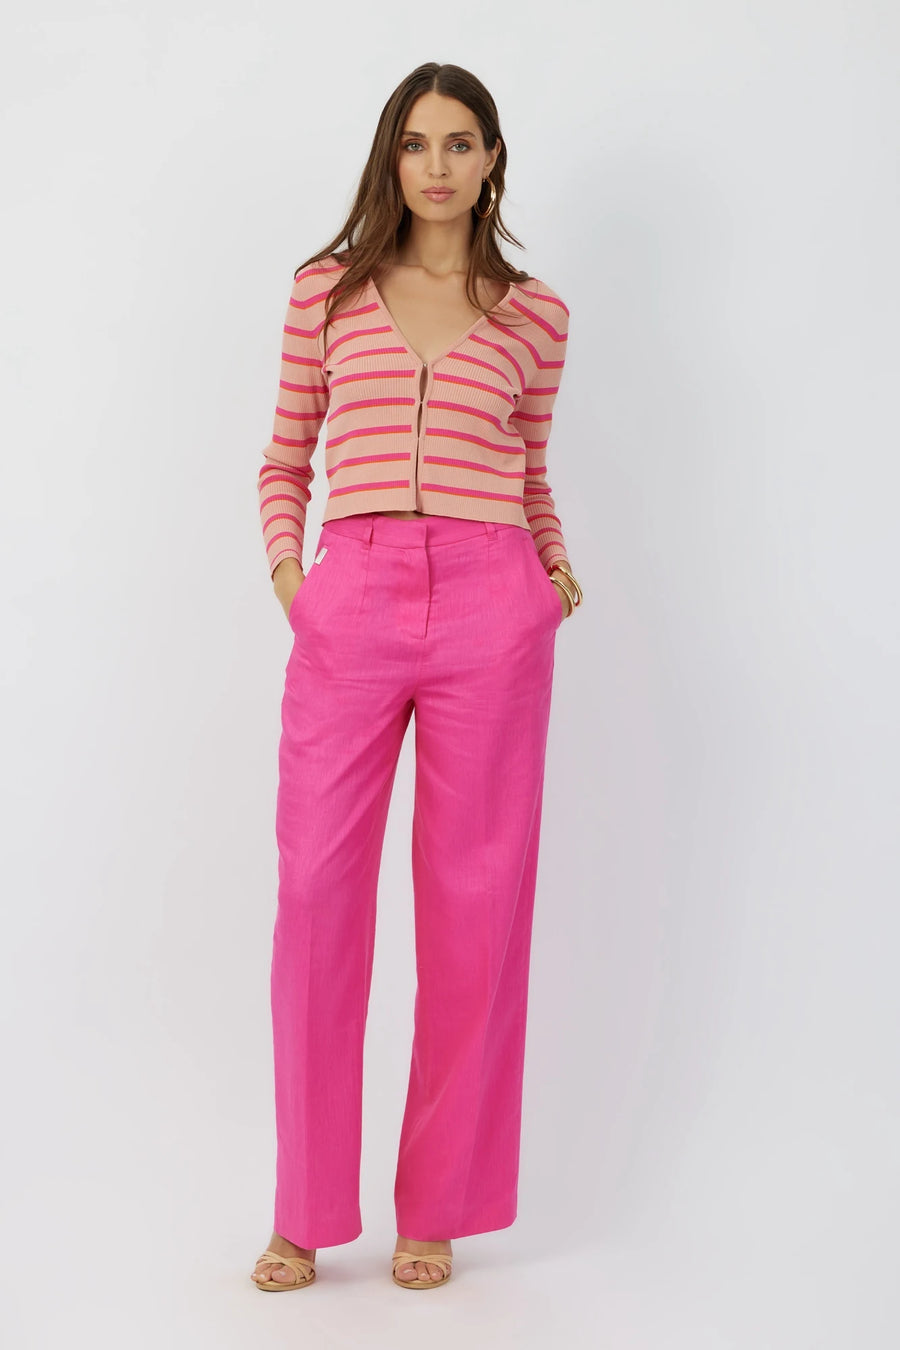 The Regatta belted wide leg pants in fuchsia by Greyven